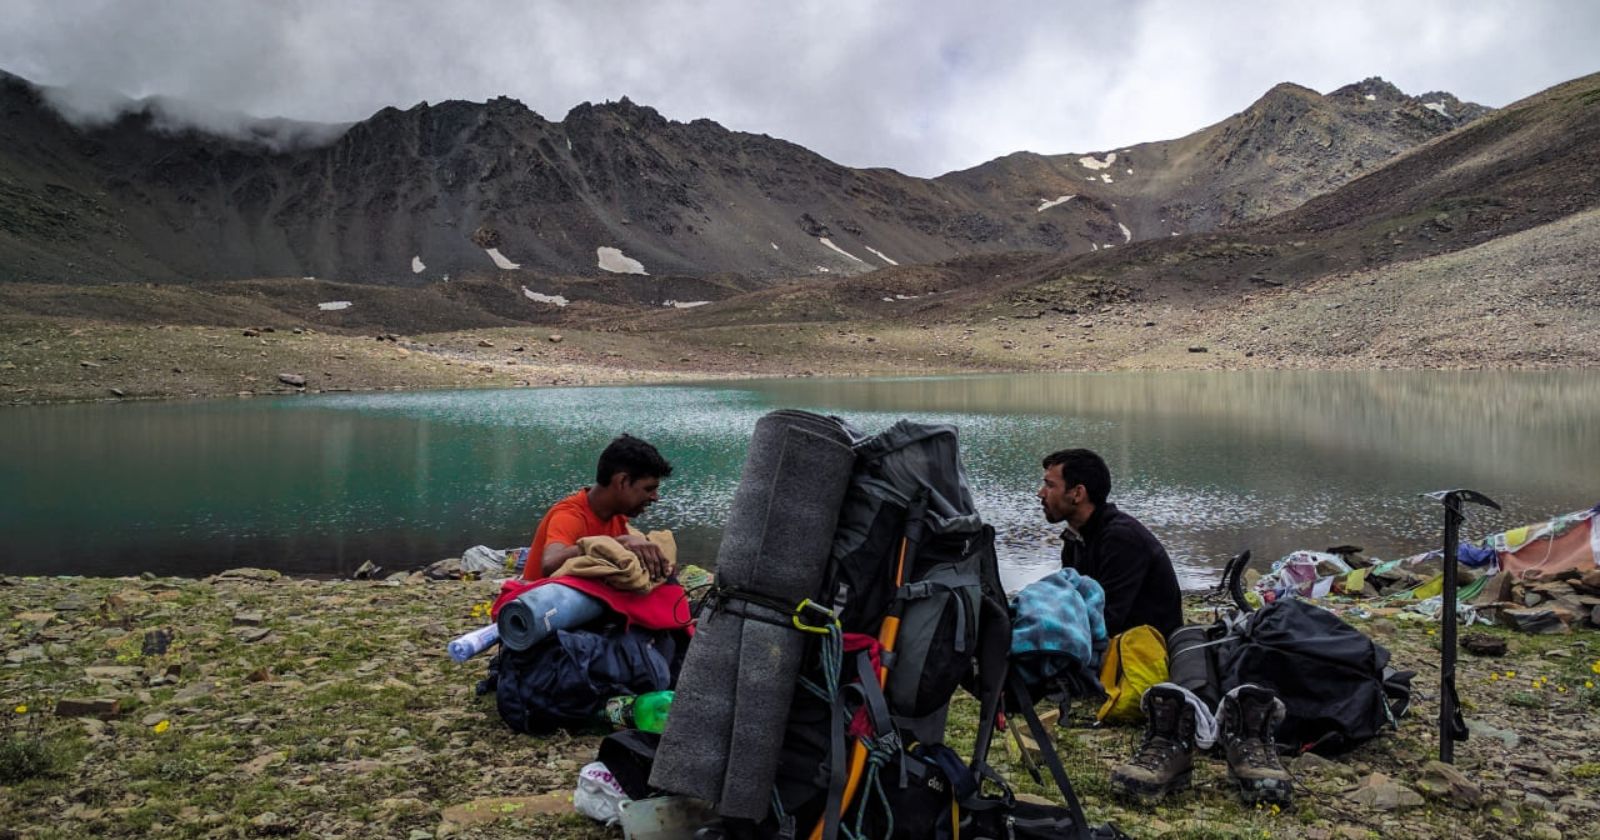 Hikers resting on the shore of Temso Lake